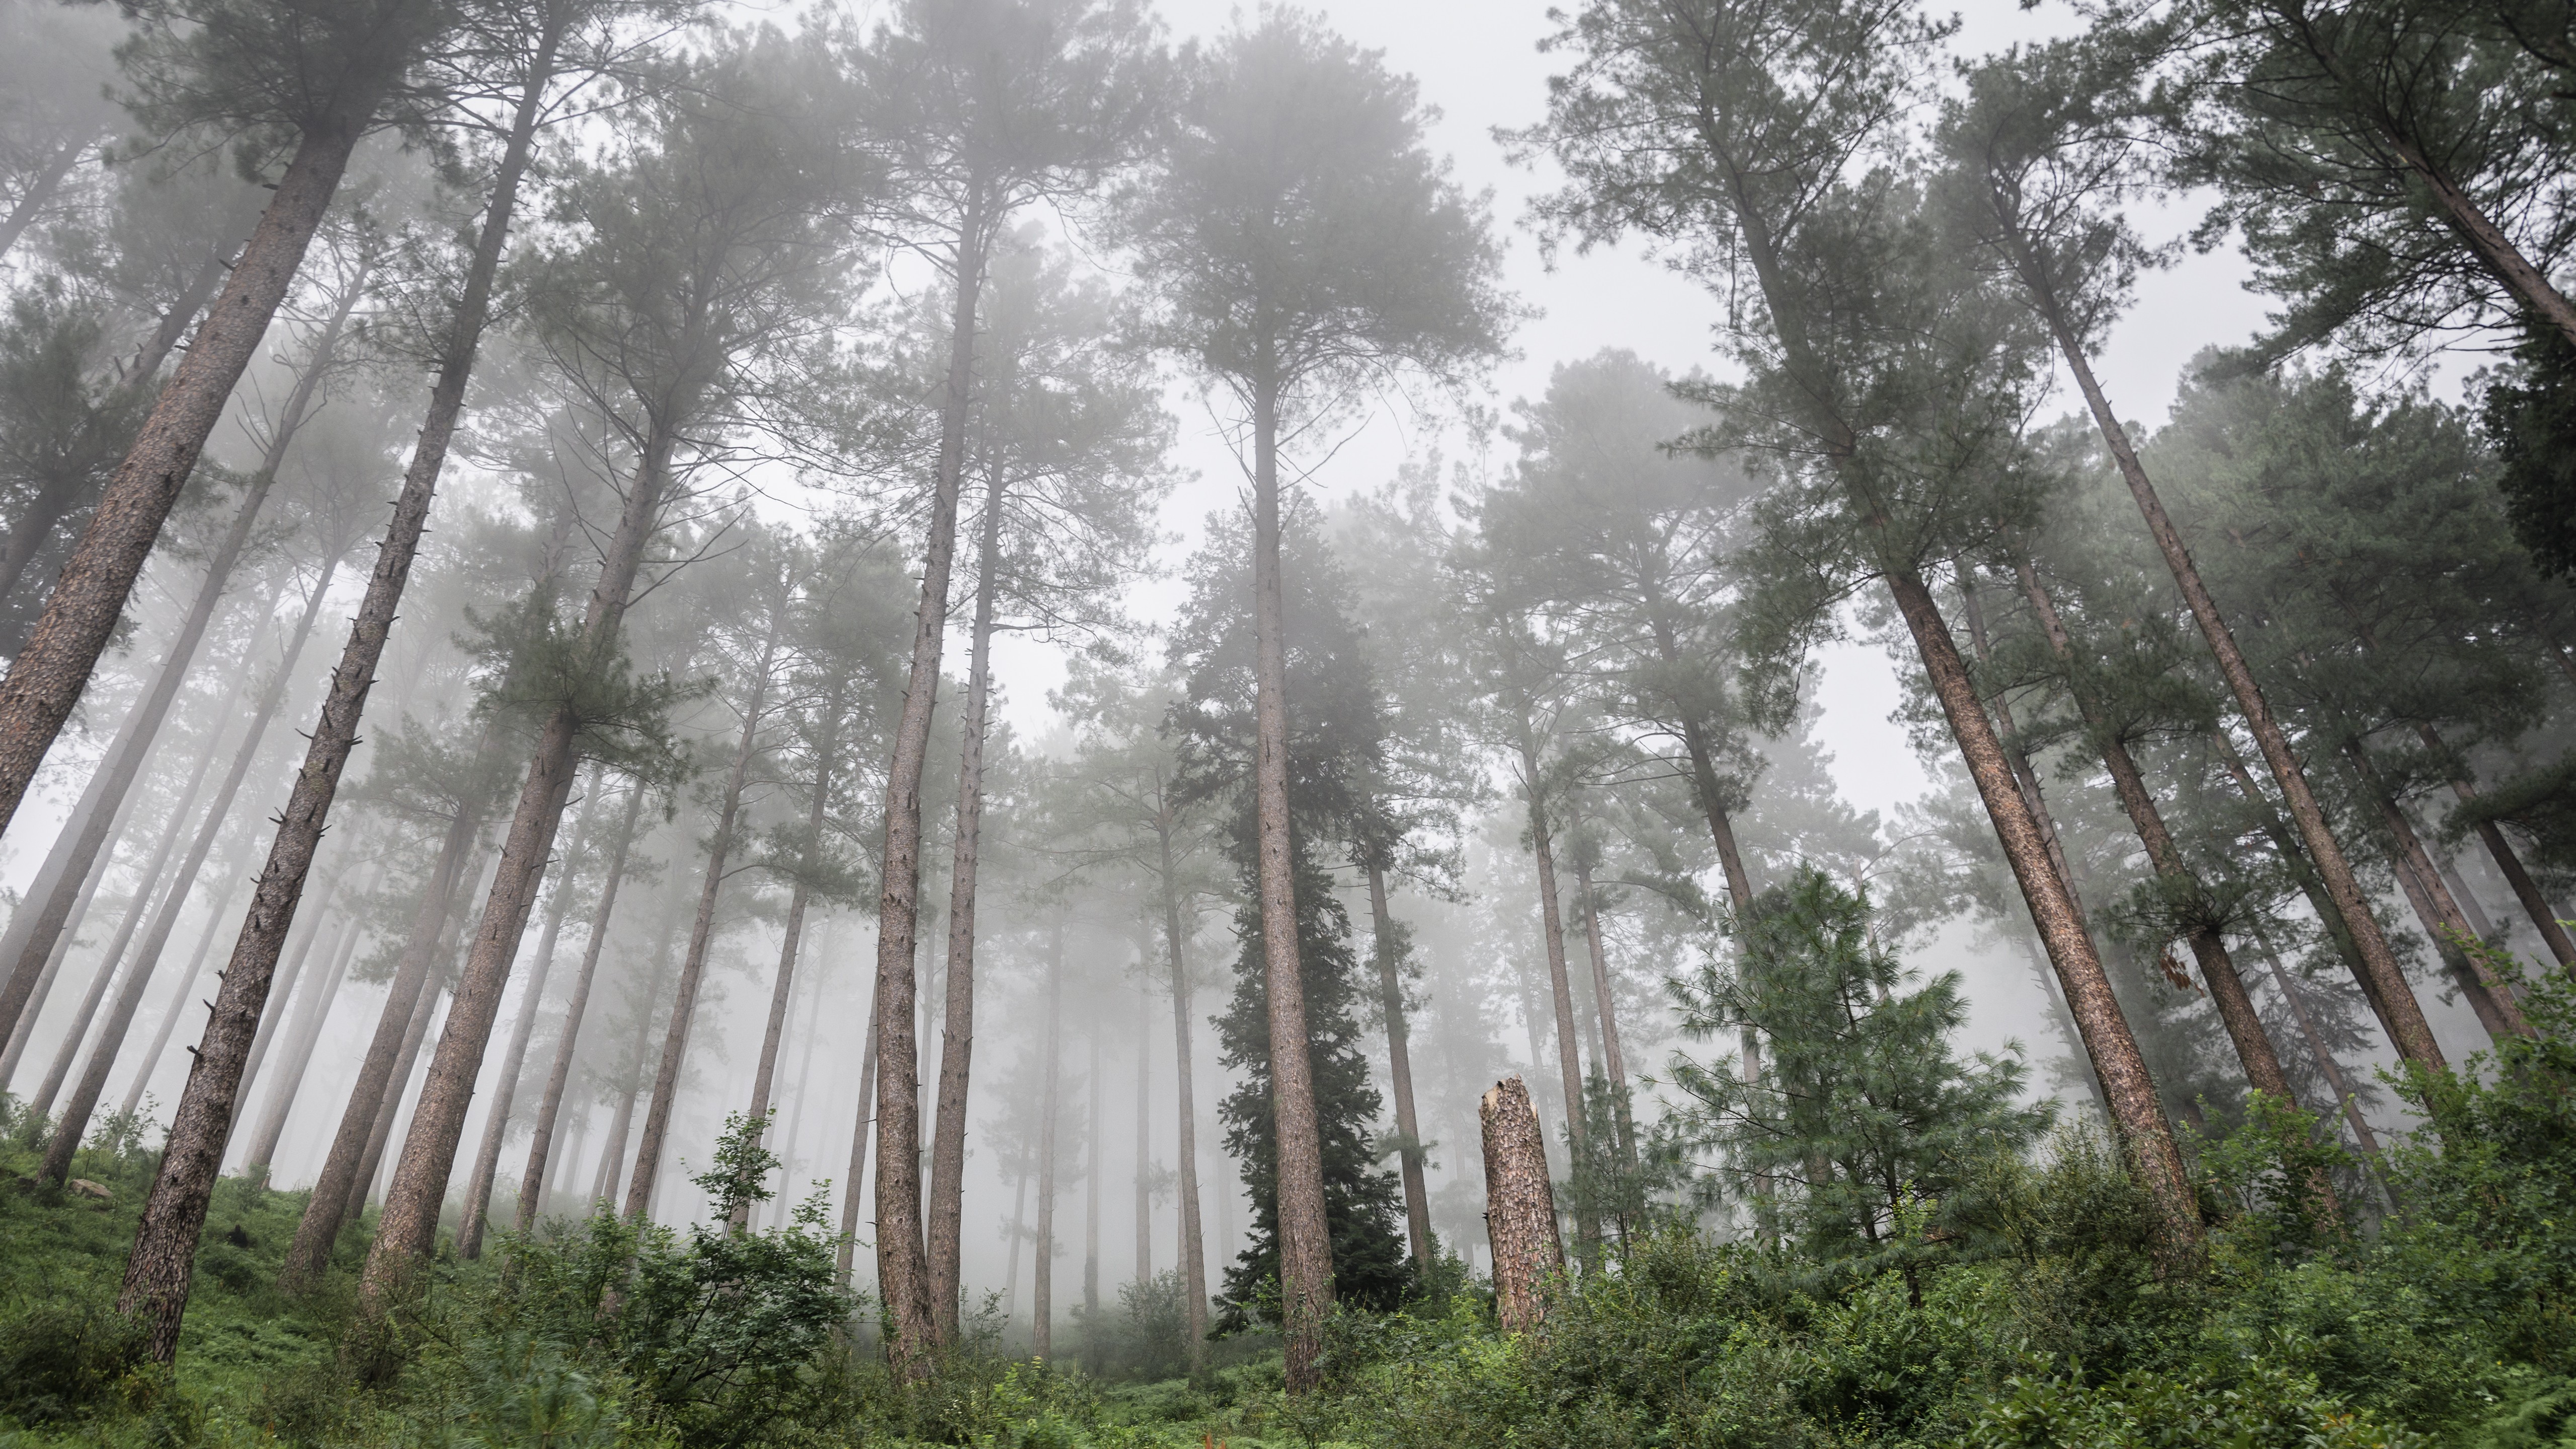 General 5120x2880 photography nature trees forest mist